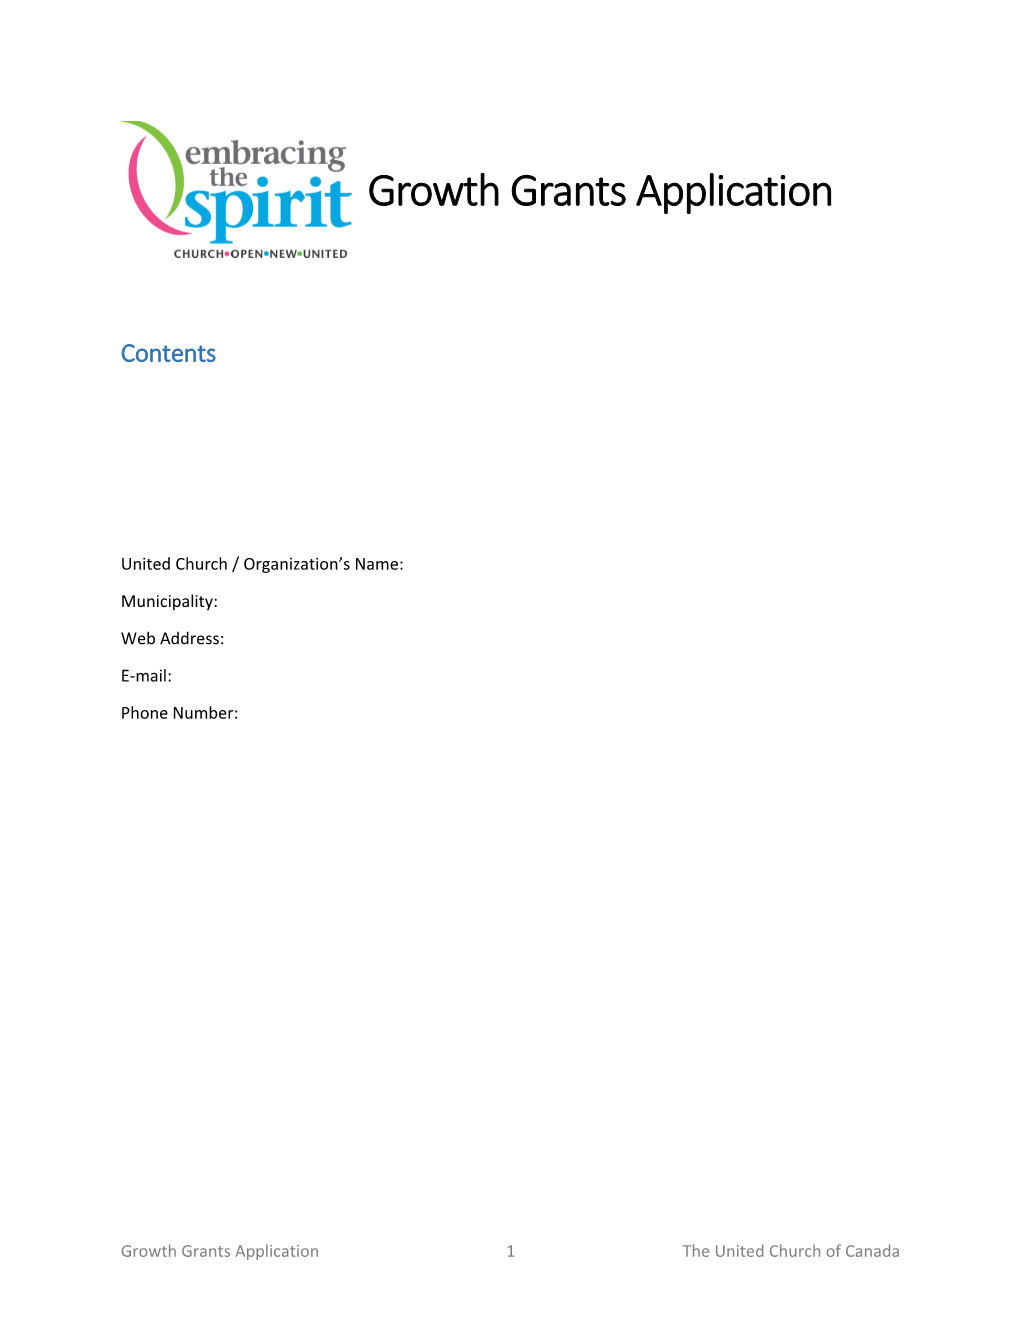 Embracing the Spirit: Growth Grants Application Form